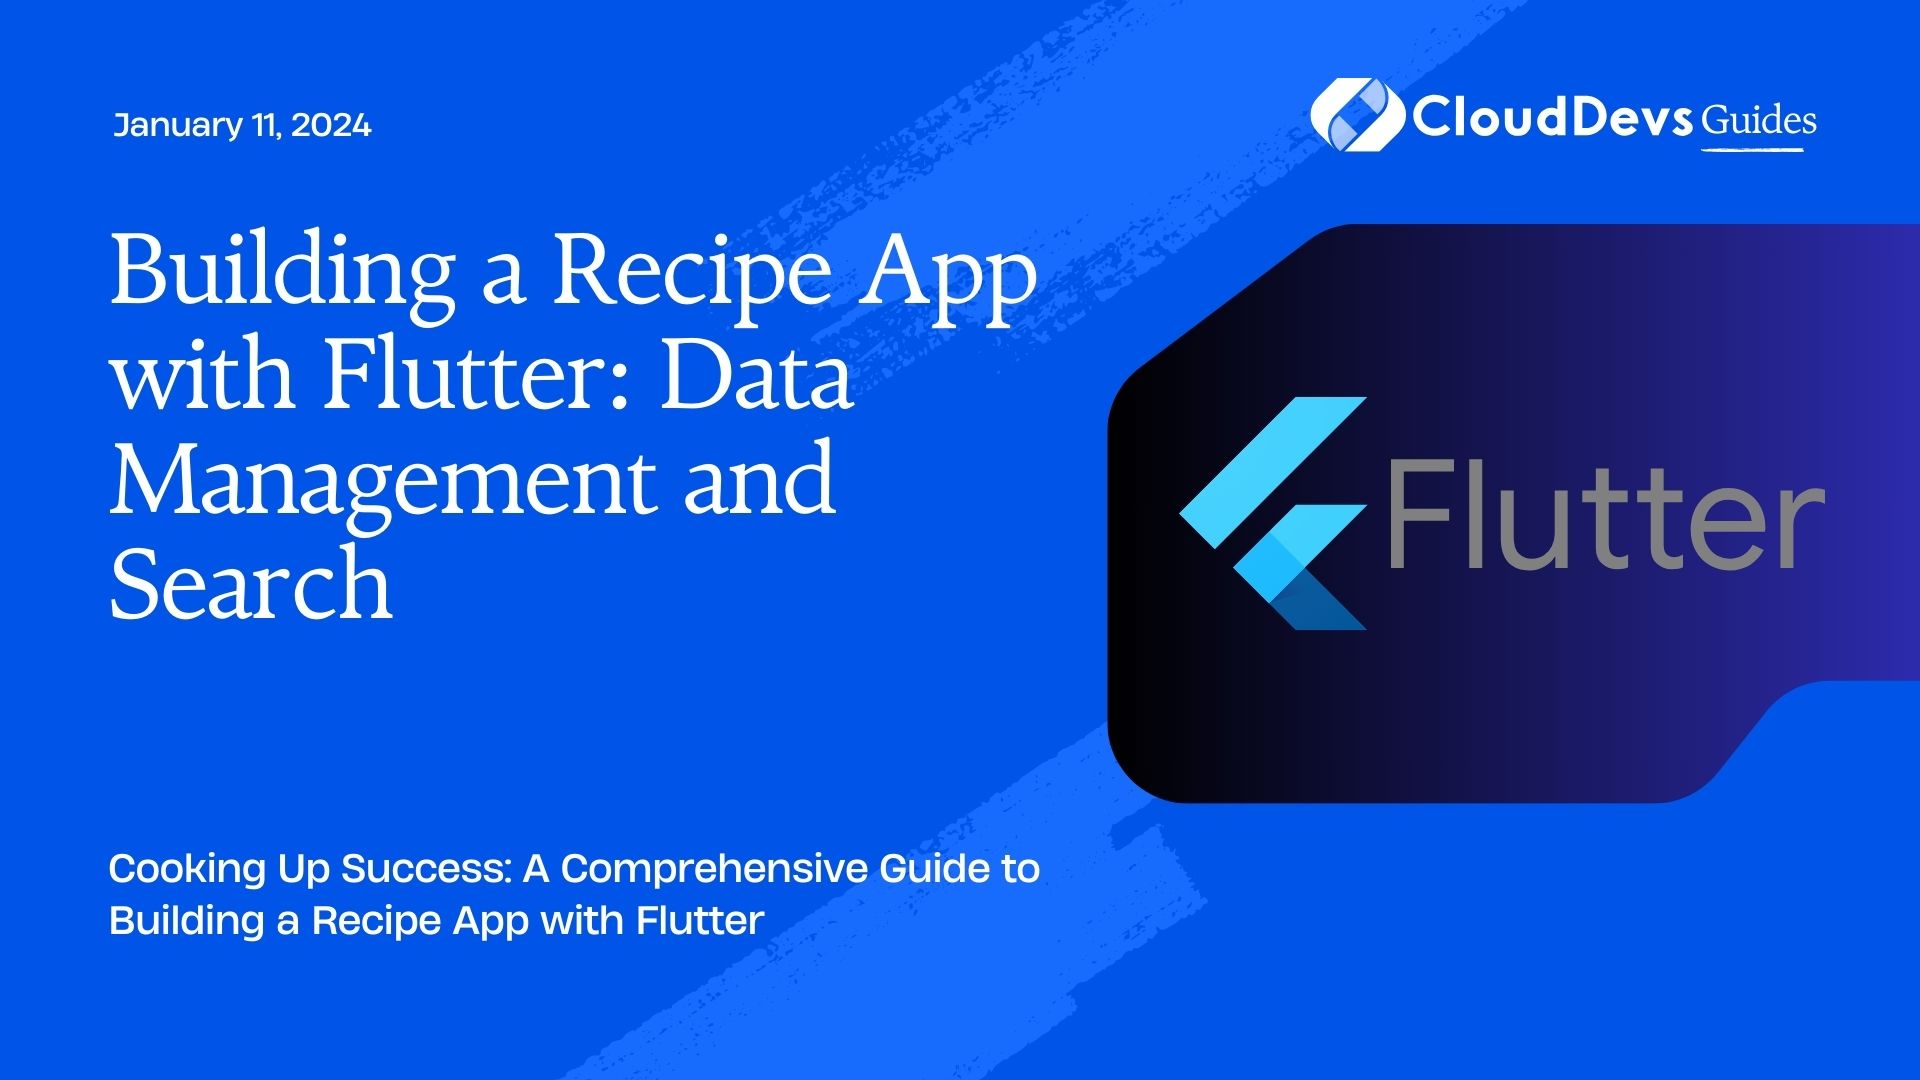 Building a Recipe App with Flutter: Data Management and Search